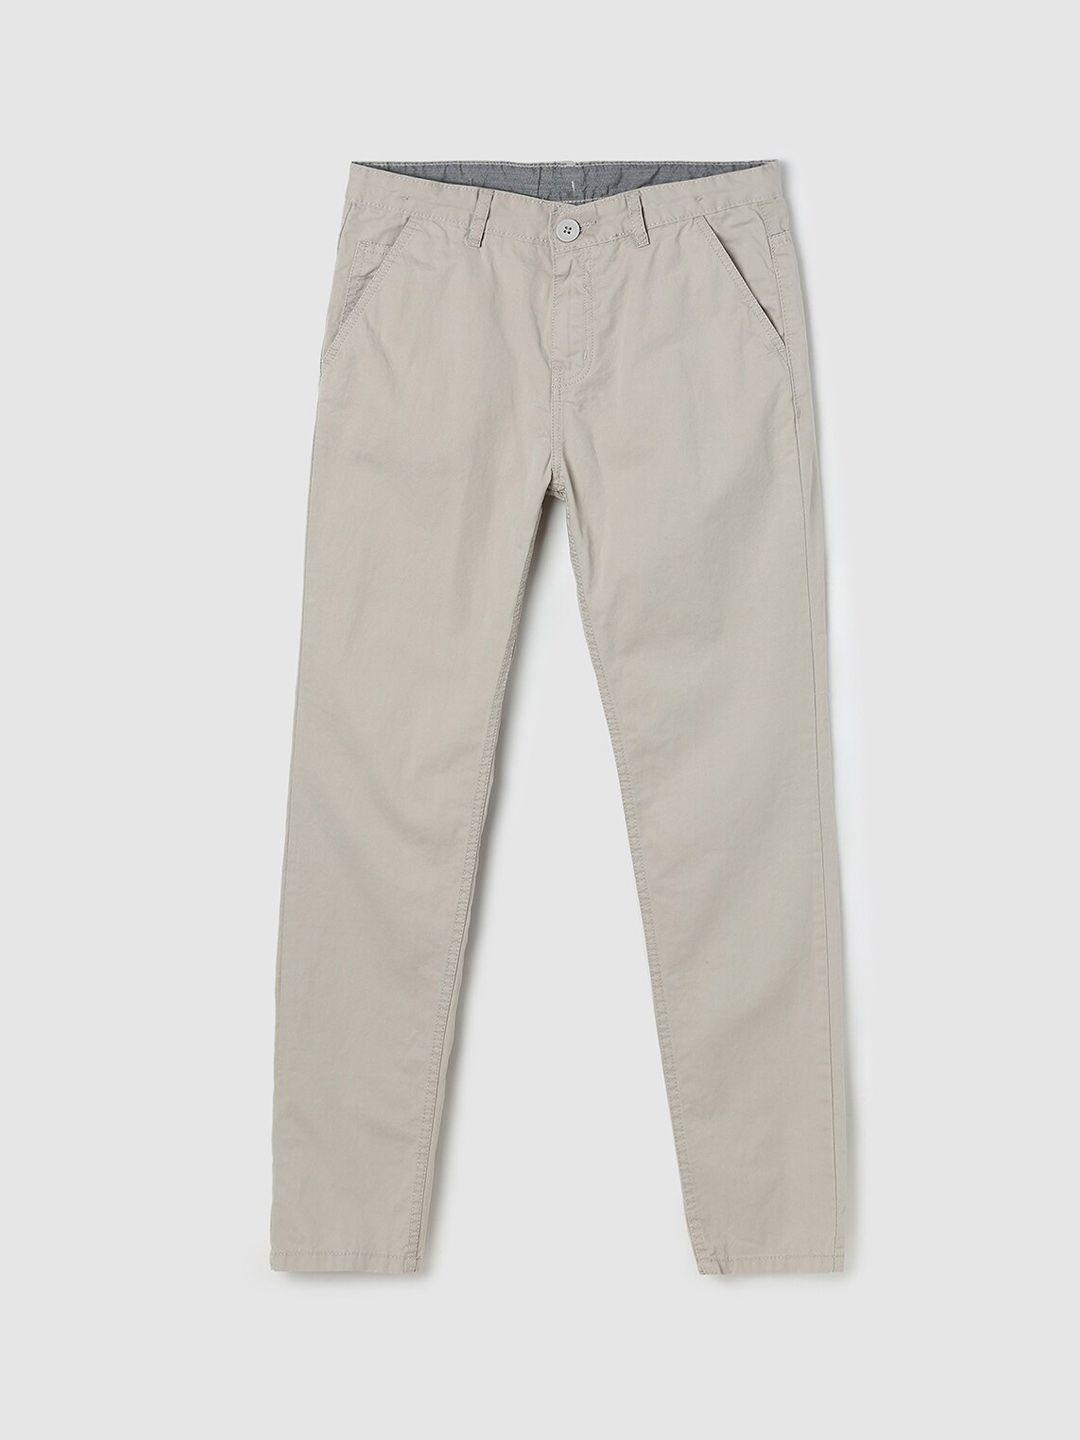 max boys cotton chinos trousers